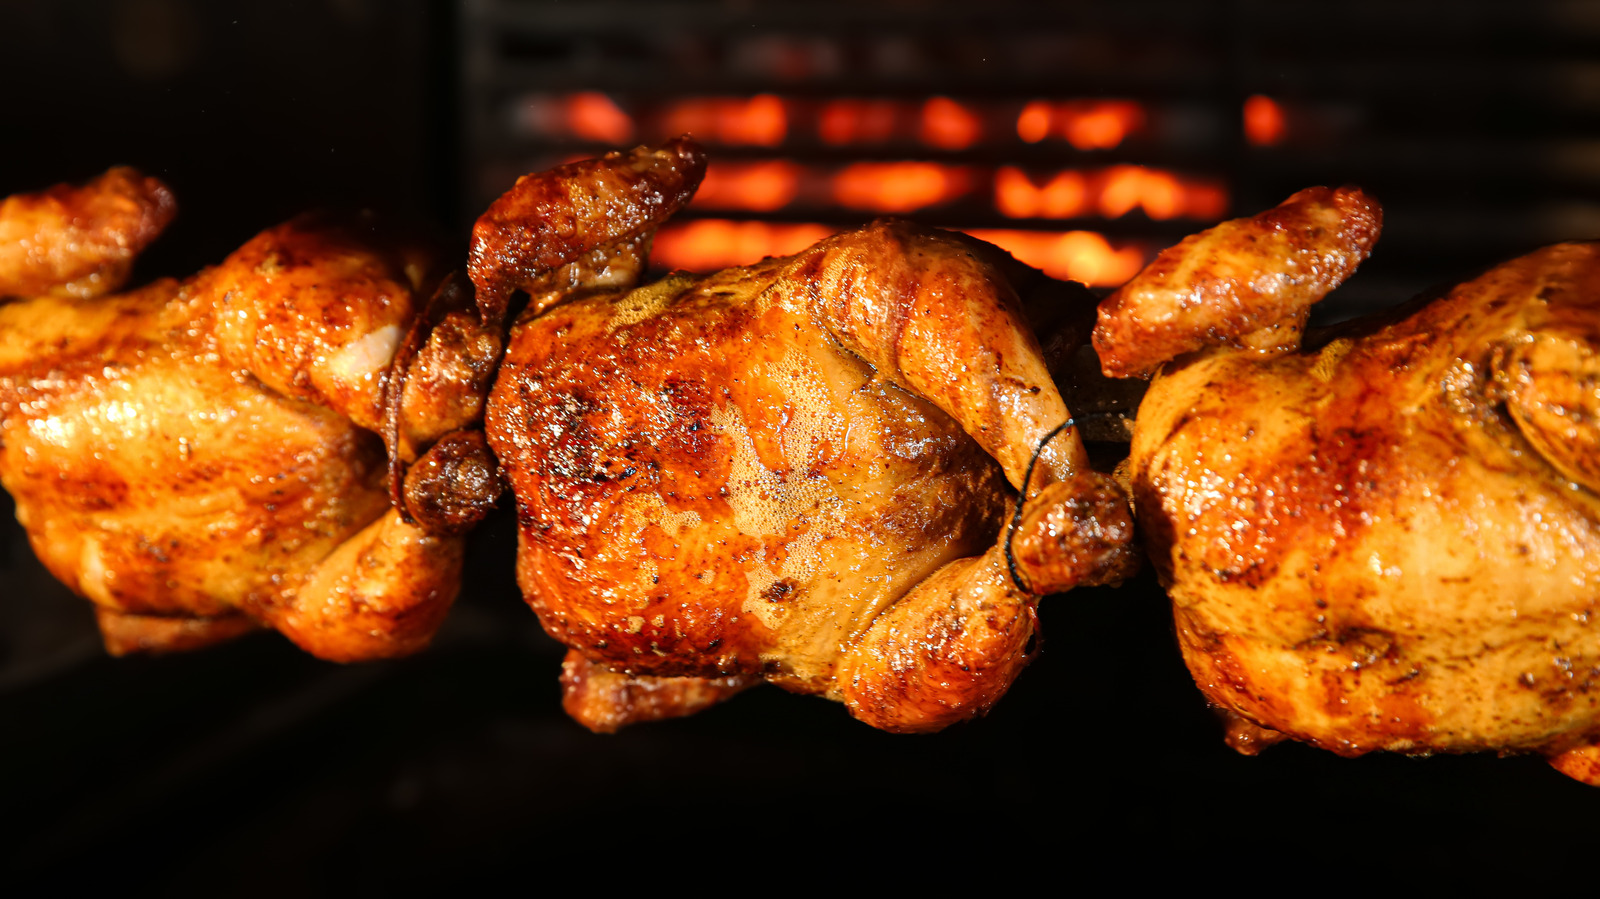 How to Pick the Juiciest Rotisserie Chicken at the Grocery Store